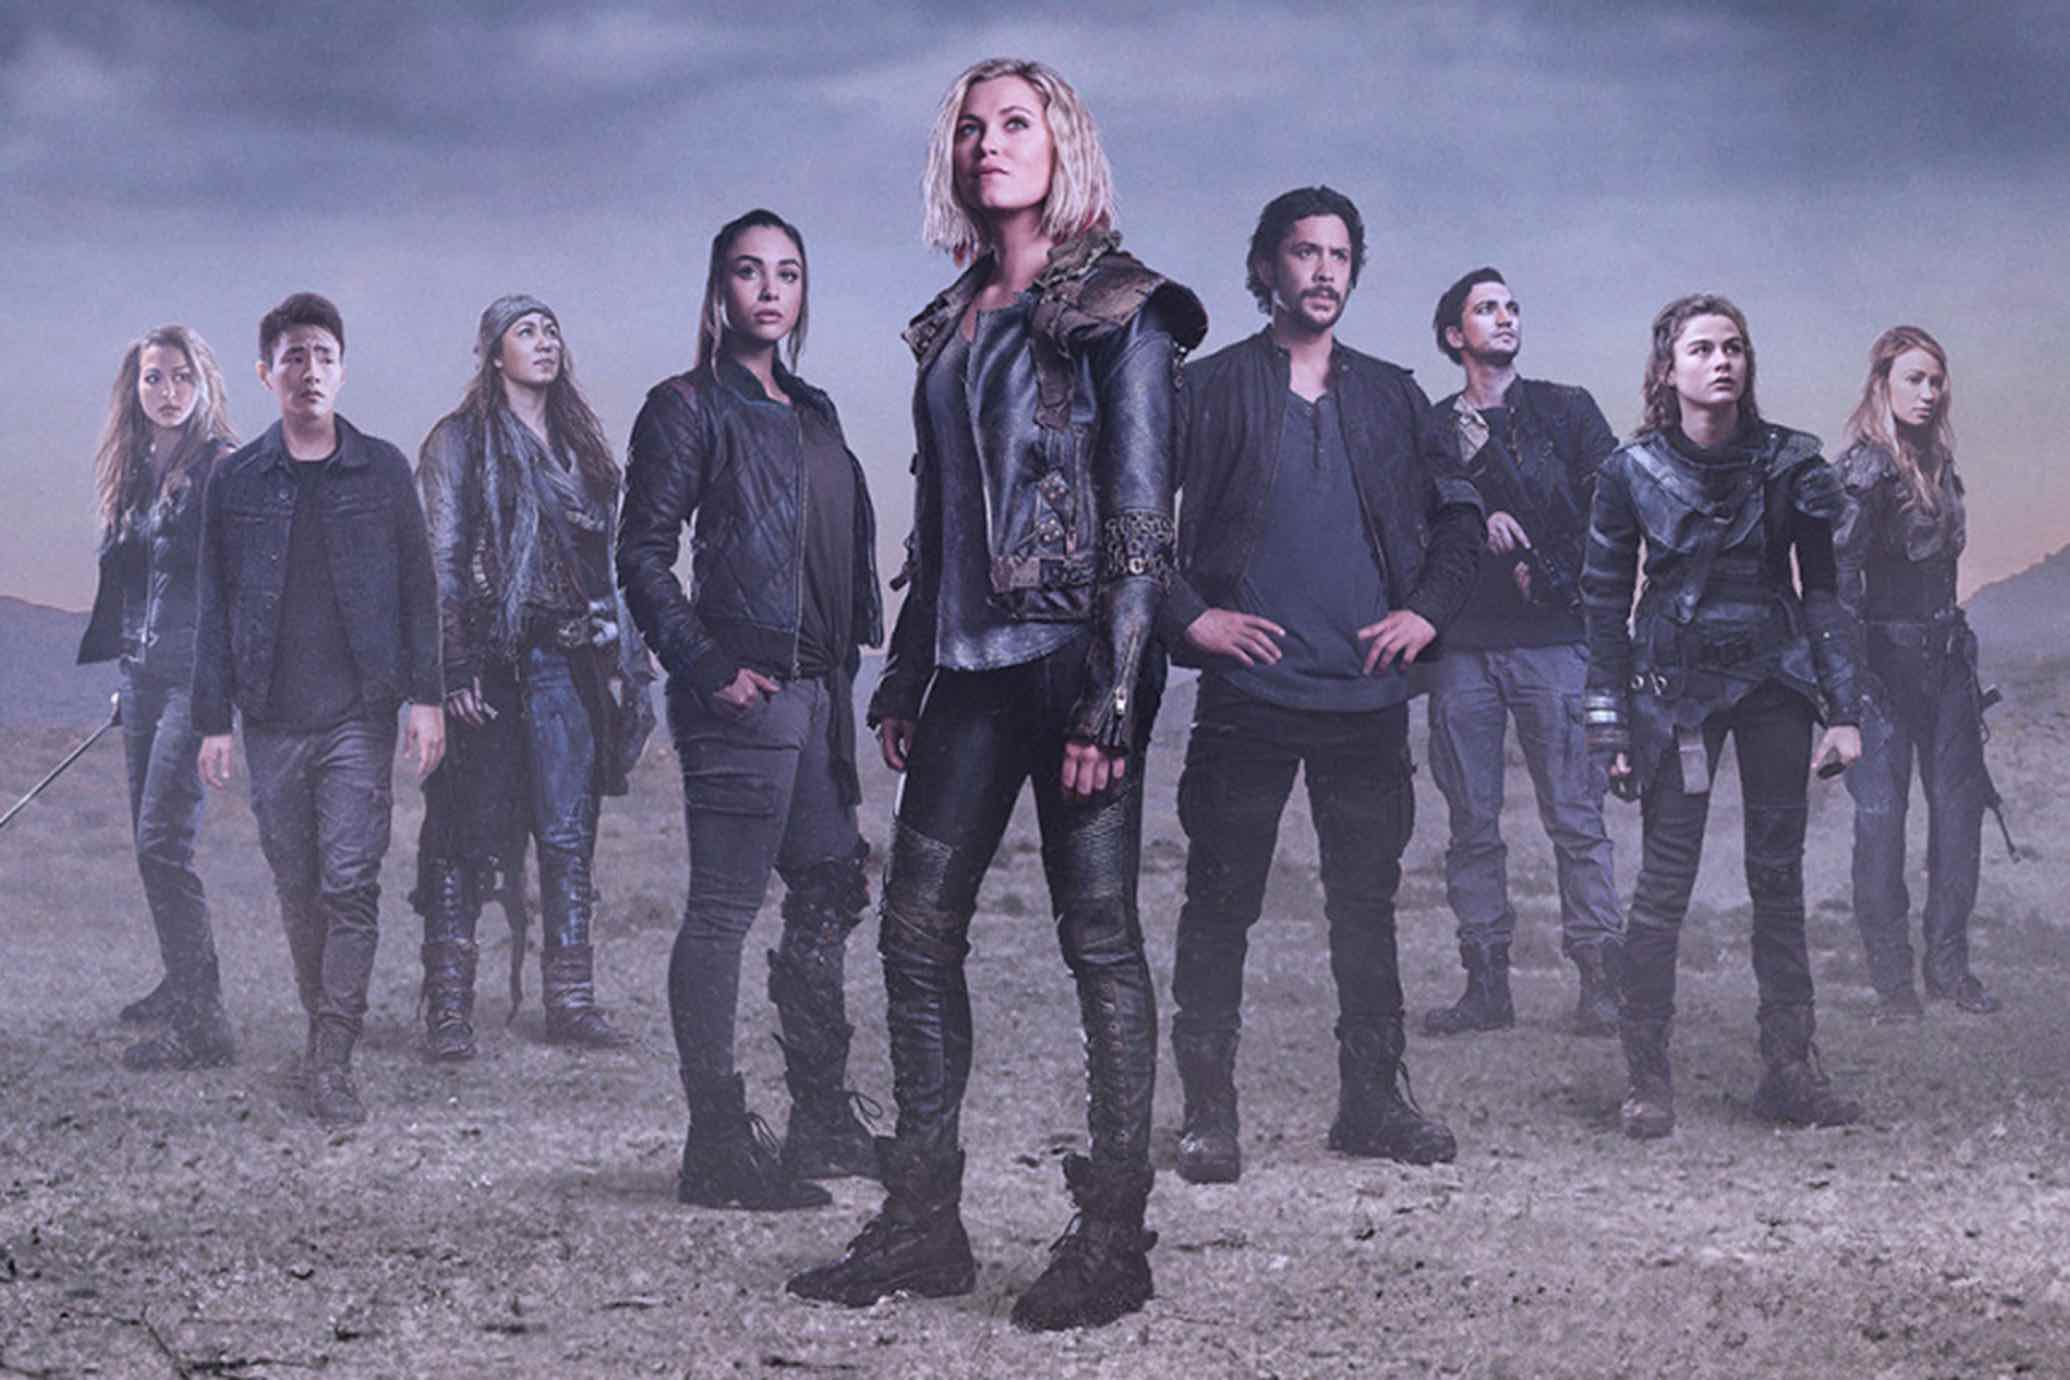 'The 100' features the most complex female characters seen on the small screen. Here are all the reasons to vote for 'The 100' in the Bingewatch Awards.